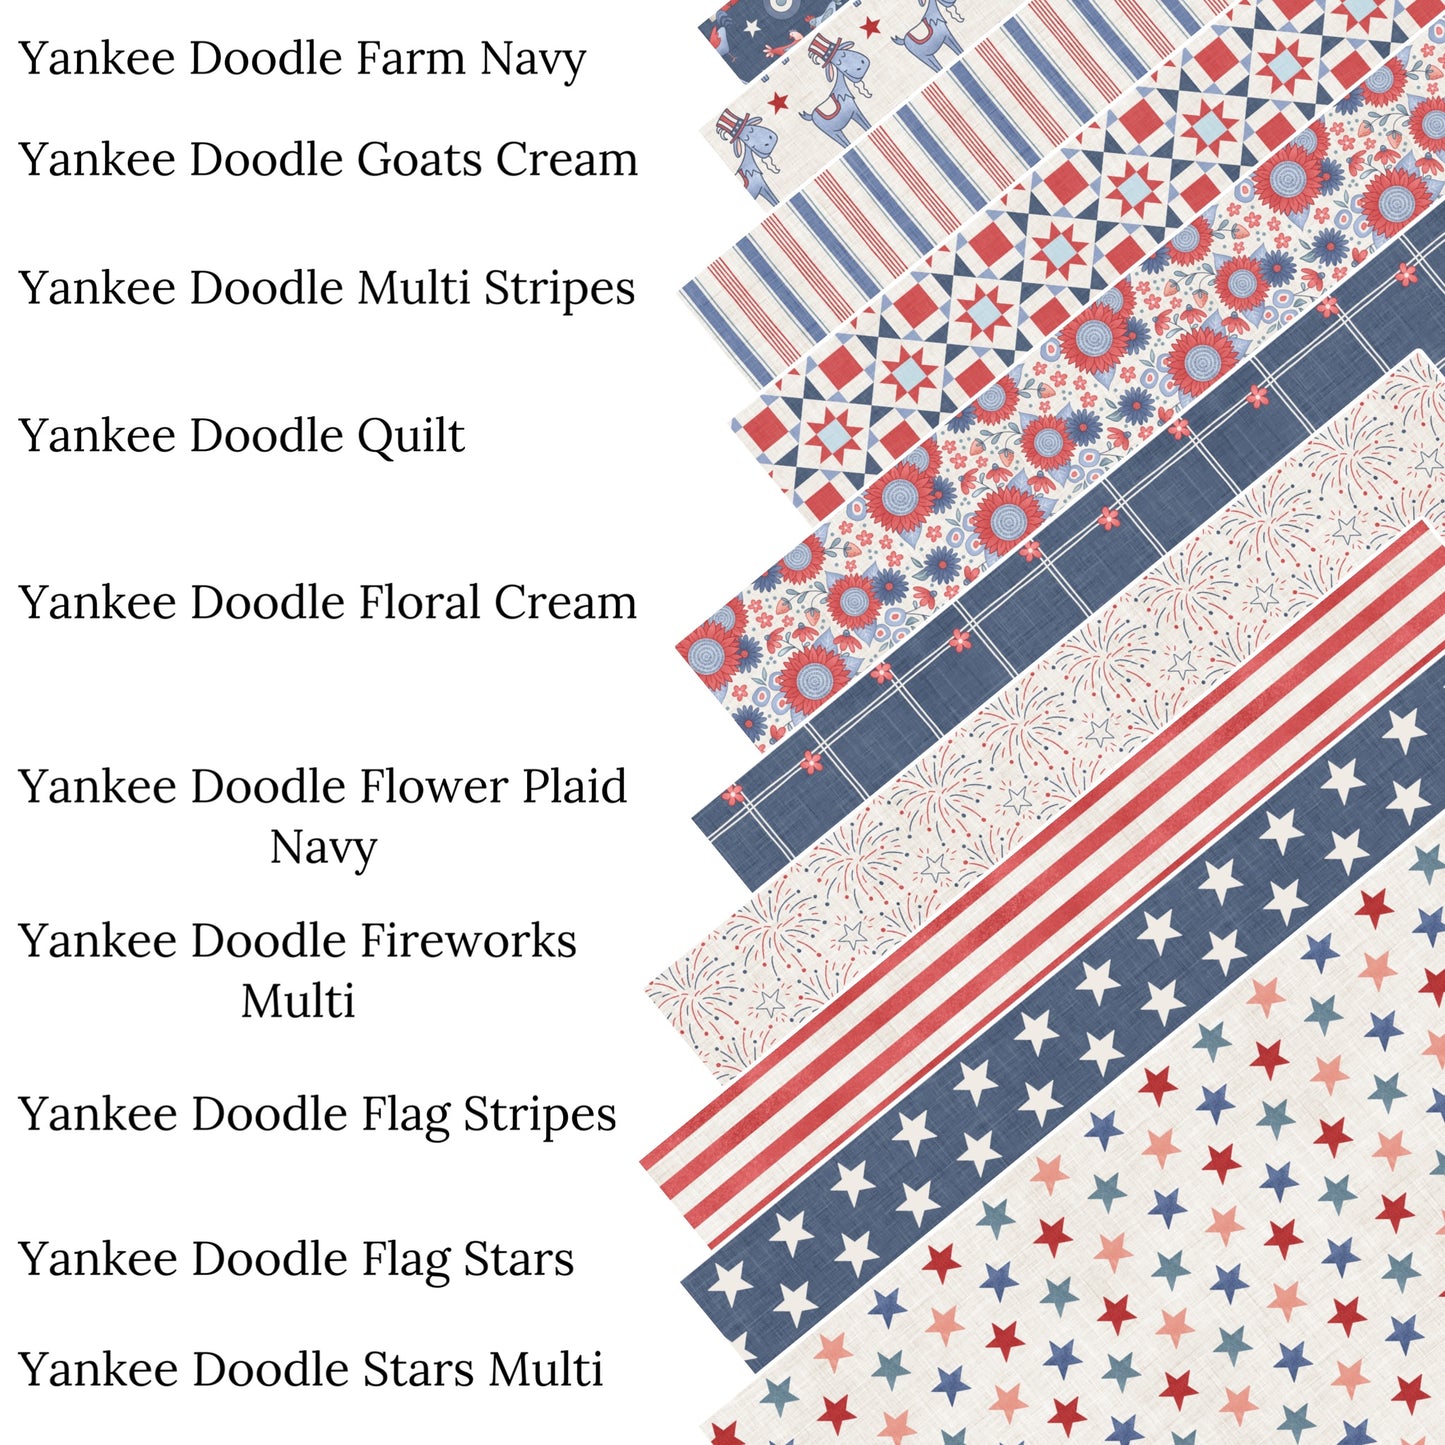 Yankee Doodle Flag Stars Faux Leather Sheets